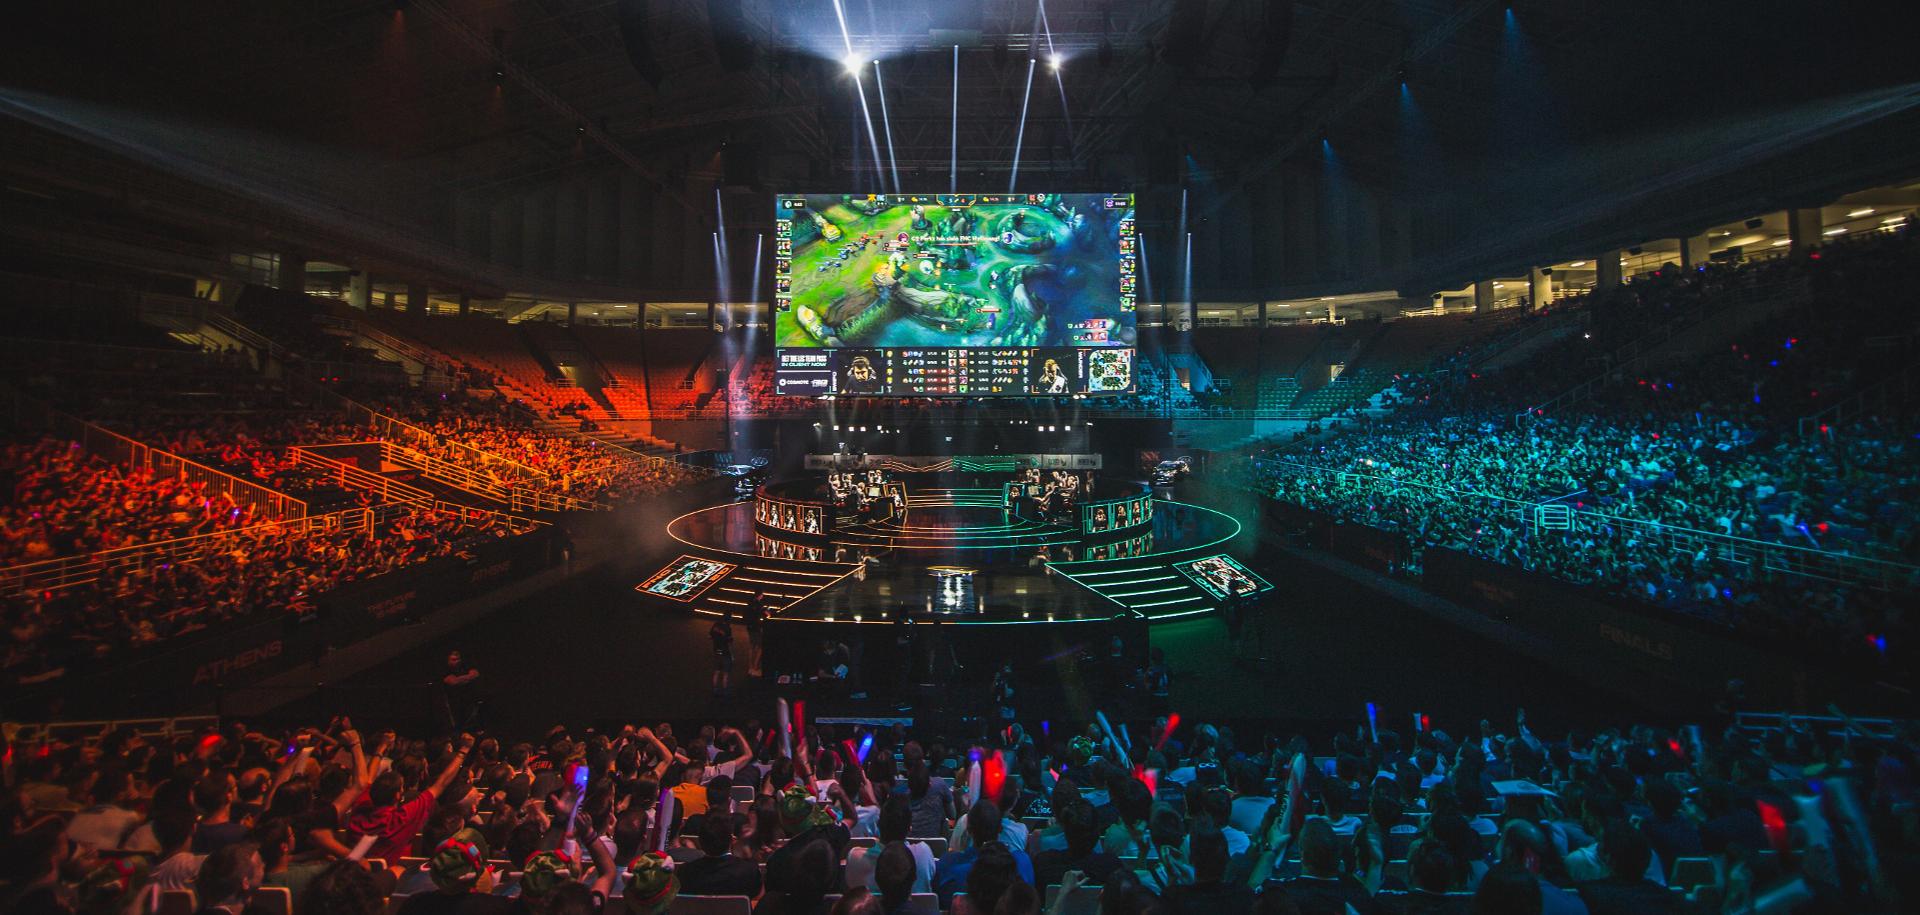 What’s new in eSports right now?